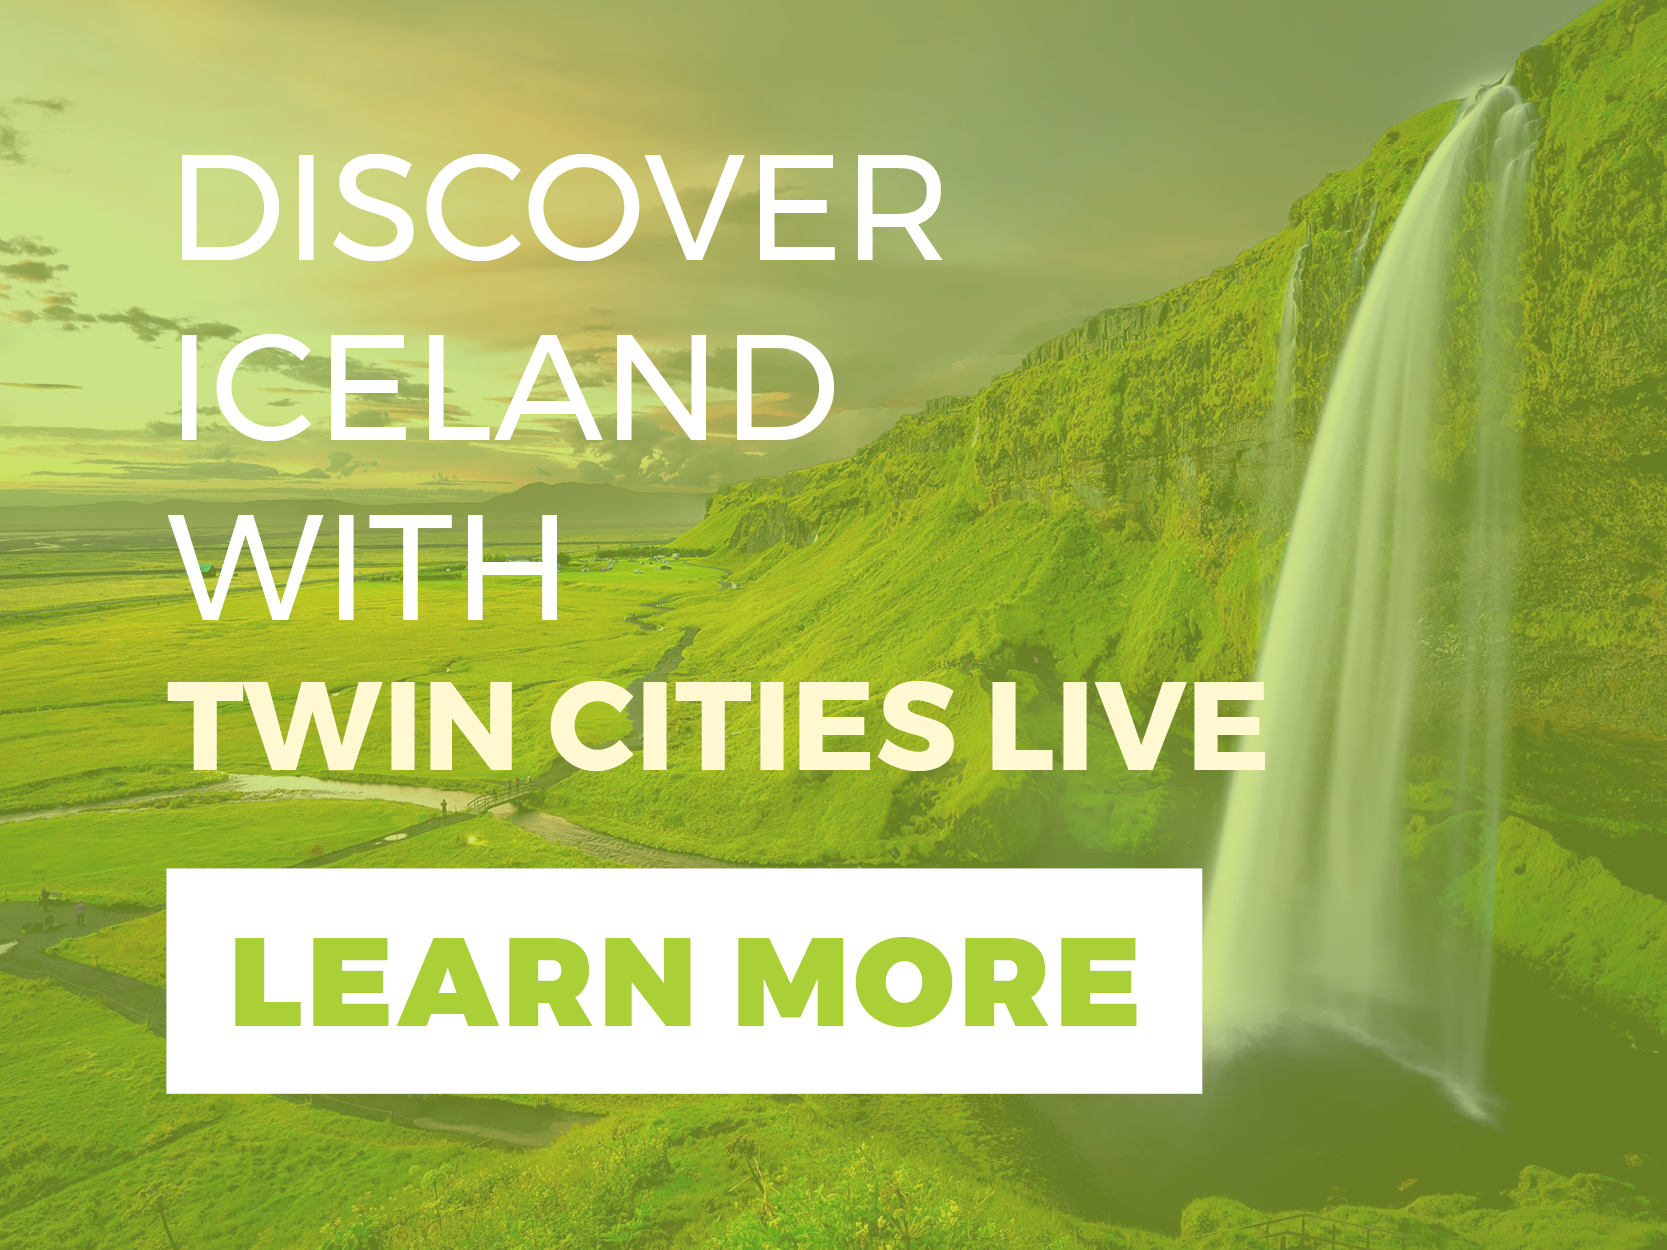 TCL Iceland Learn More